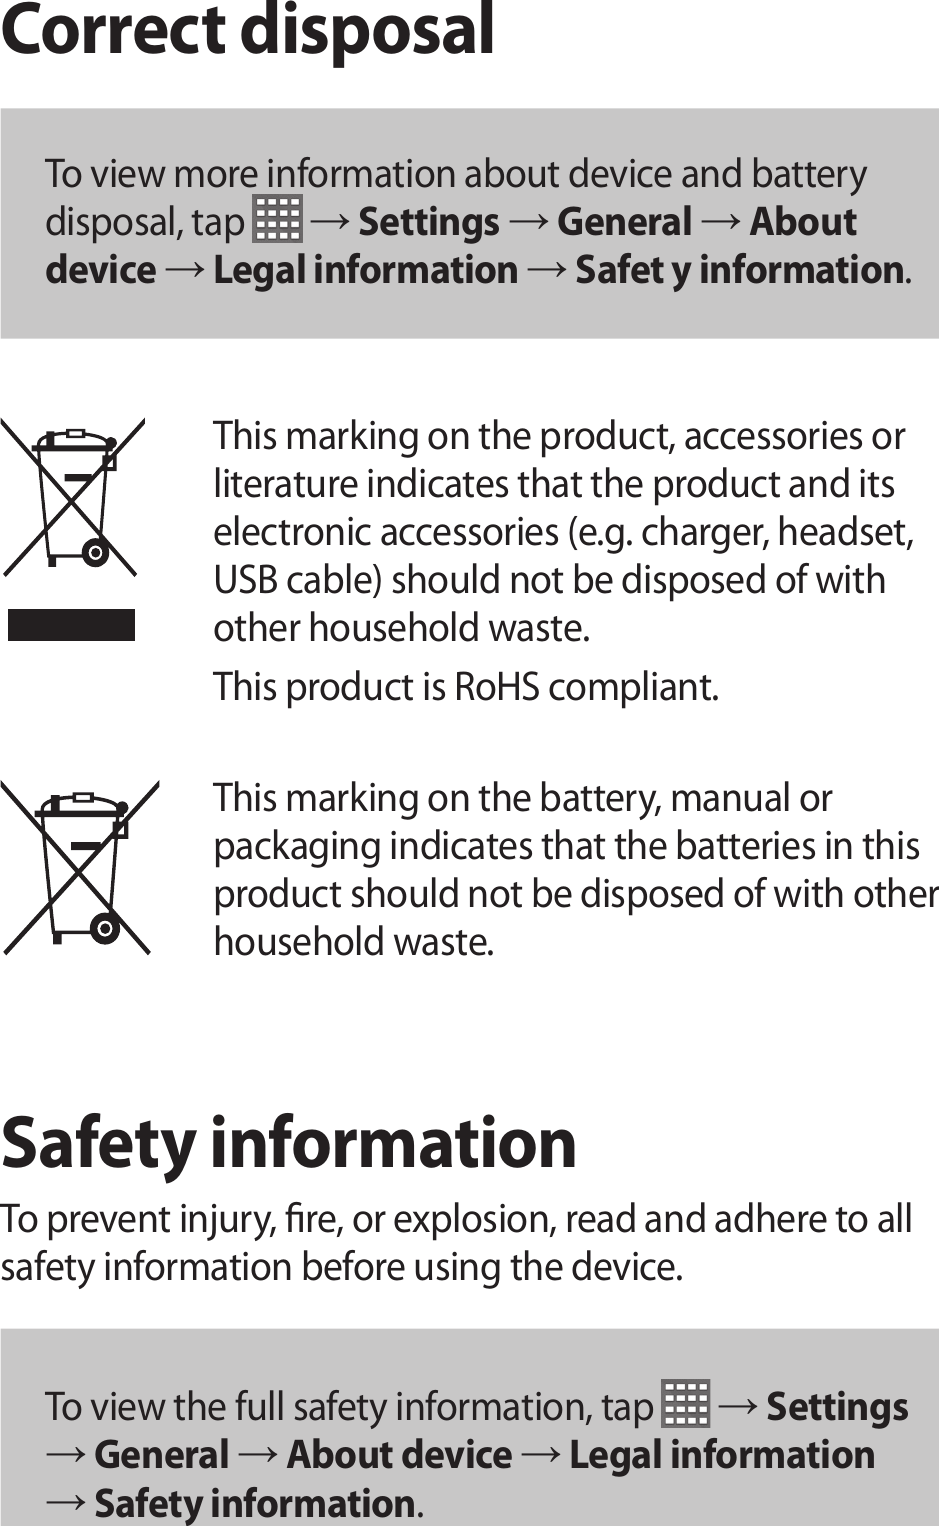 Correct disposalTo view more information about device and battery disposal, tap  → Settings → General → About device → Legal information → Safet y information.This marking on the product, accessories or literature indicates that the product and its electronic accessories (e.g. charger, headset, USB cable) should not be disposed of with other household waste.This product is RoHS compliant. This marking on the battery, manual or packaging indicates that the batteries in this product should not be disposed of with other household waste.Safety informationTo prevent injury, re, or explosion, read and adhere to all safety information before using the device.To view the full safety information, tap   → Settings → General → About device → Legal information → Safety information.